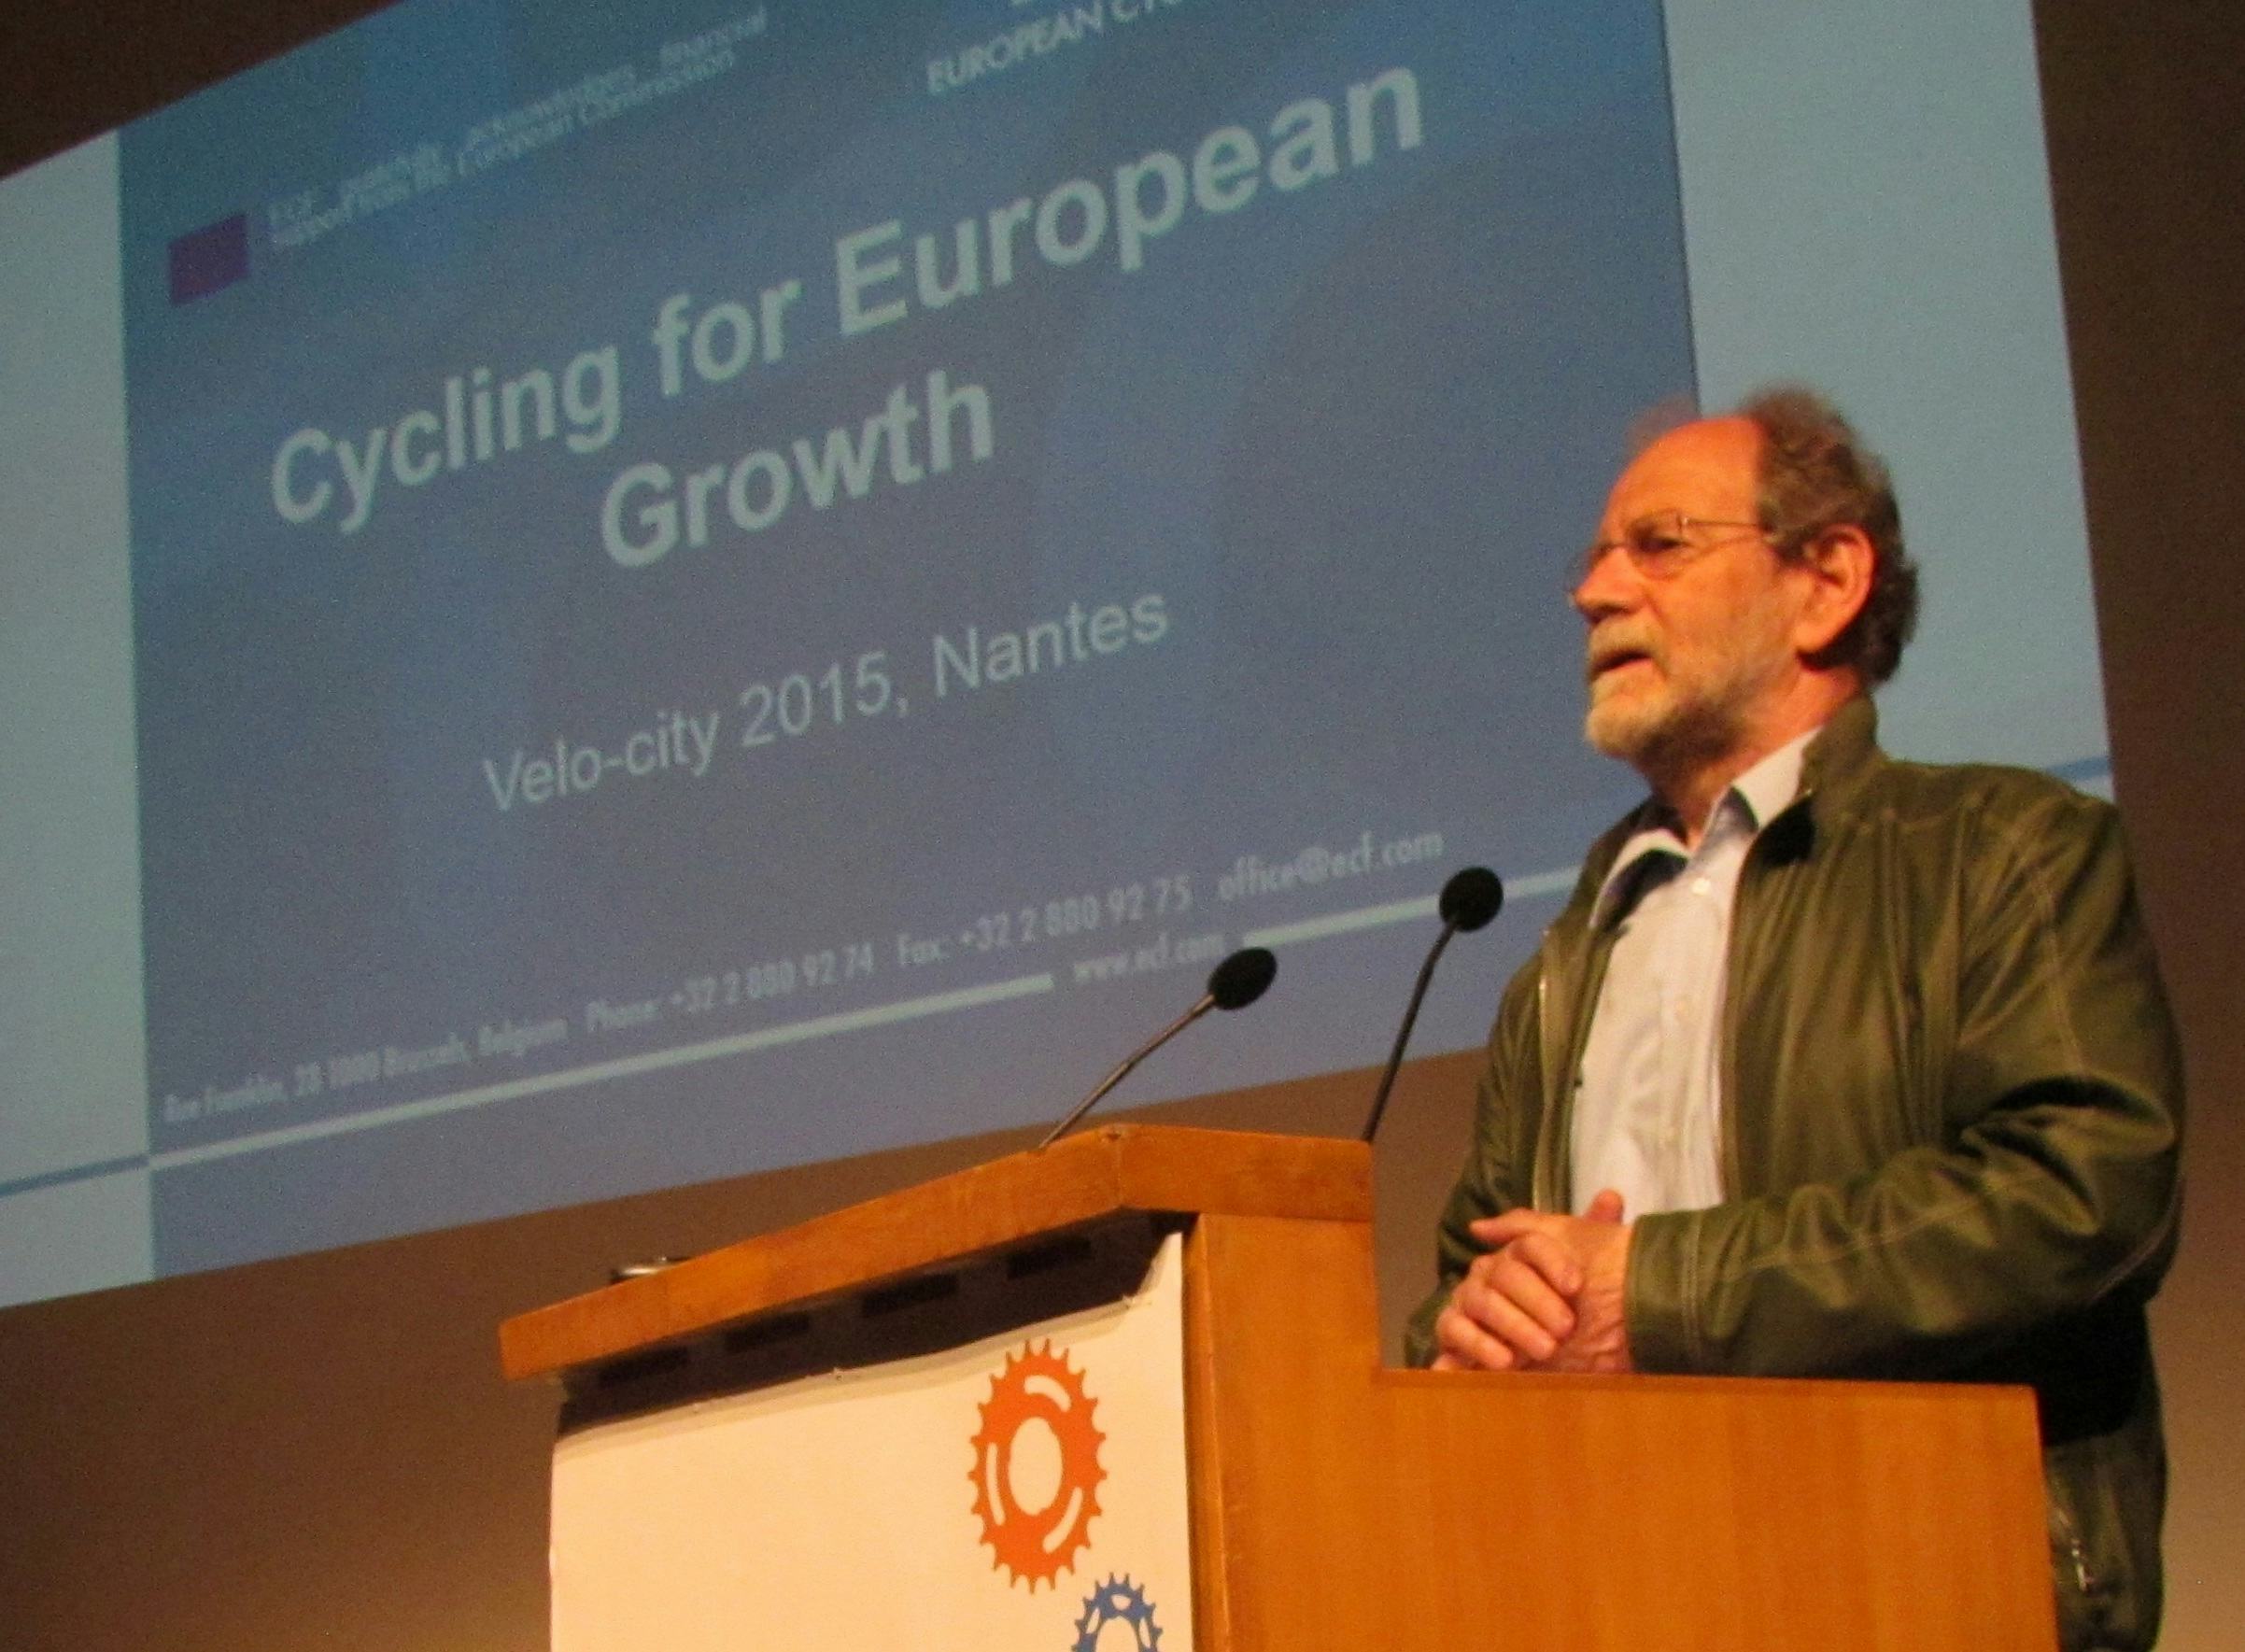 Next edition of Velo-city Conference Series will take place in Dublin, Ireland from 25th to 28th June 2019. – Photo Bike Europe